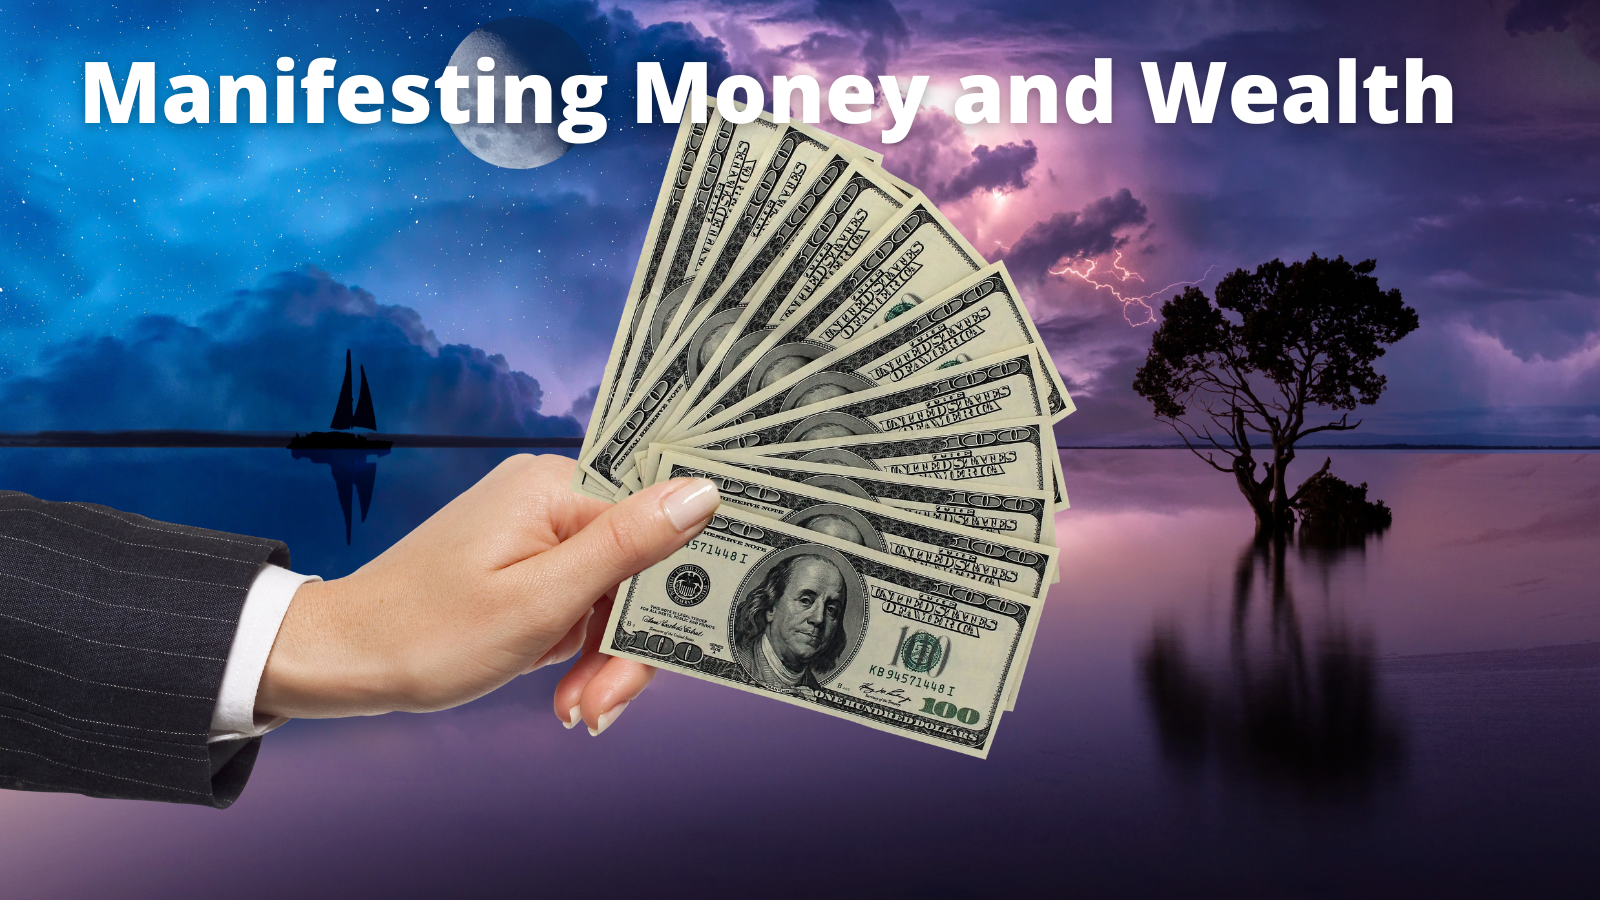 Manifesting Money and Wealth